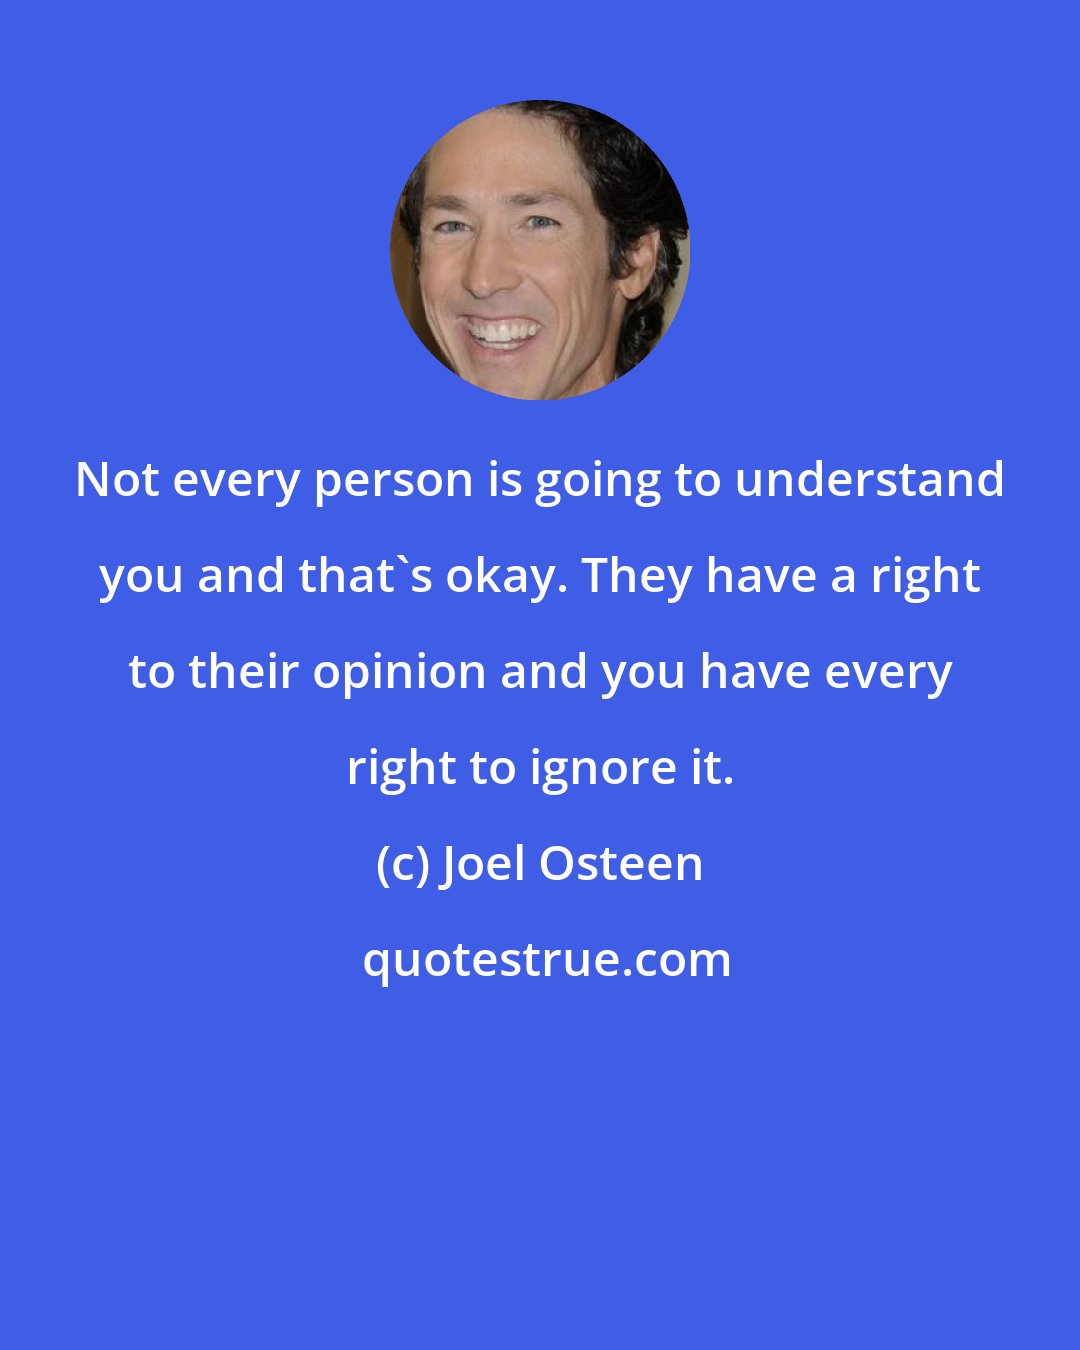 Joel Osteen: Not every person is going to understand you and that's okay. They have a right to their opinion and you have every right to ignore it.